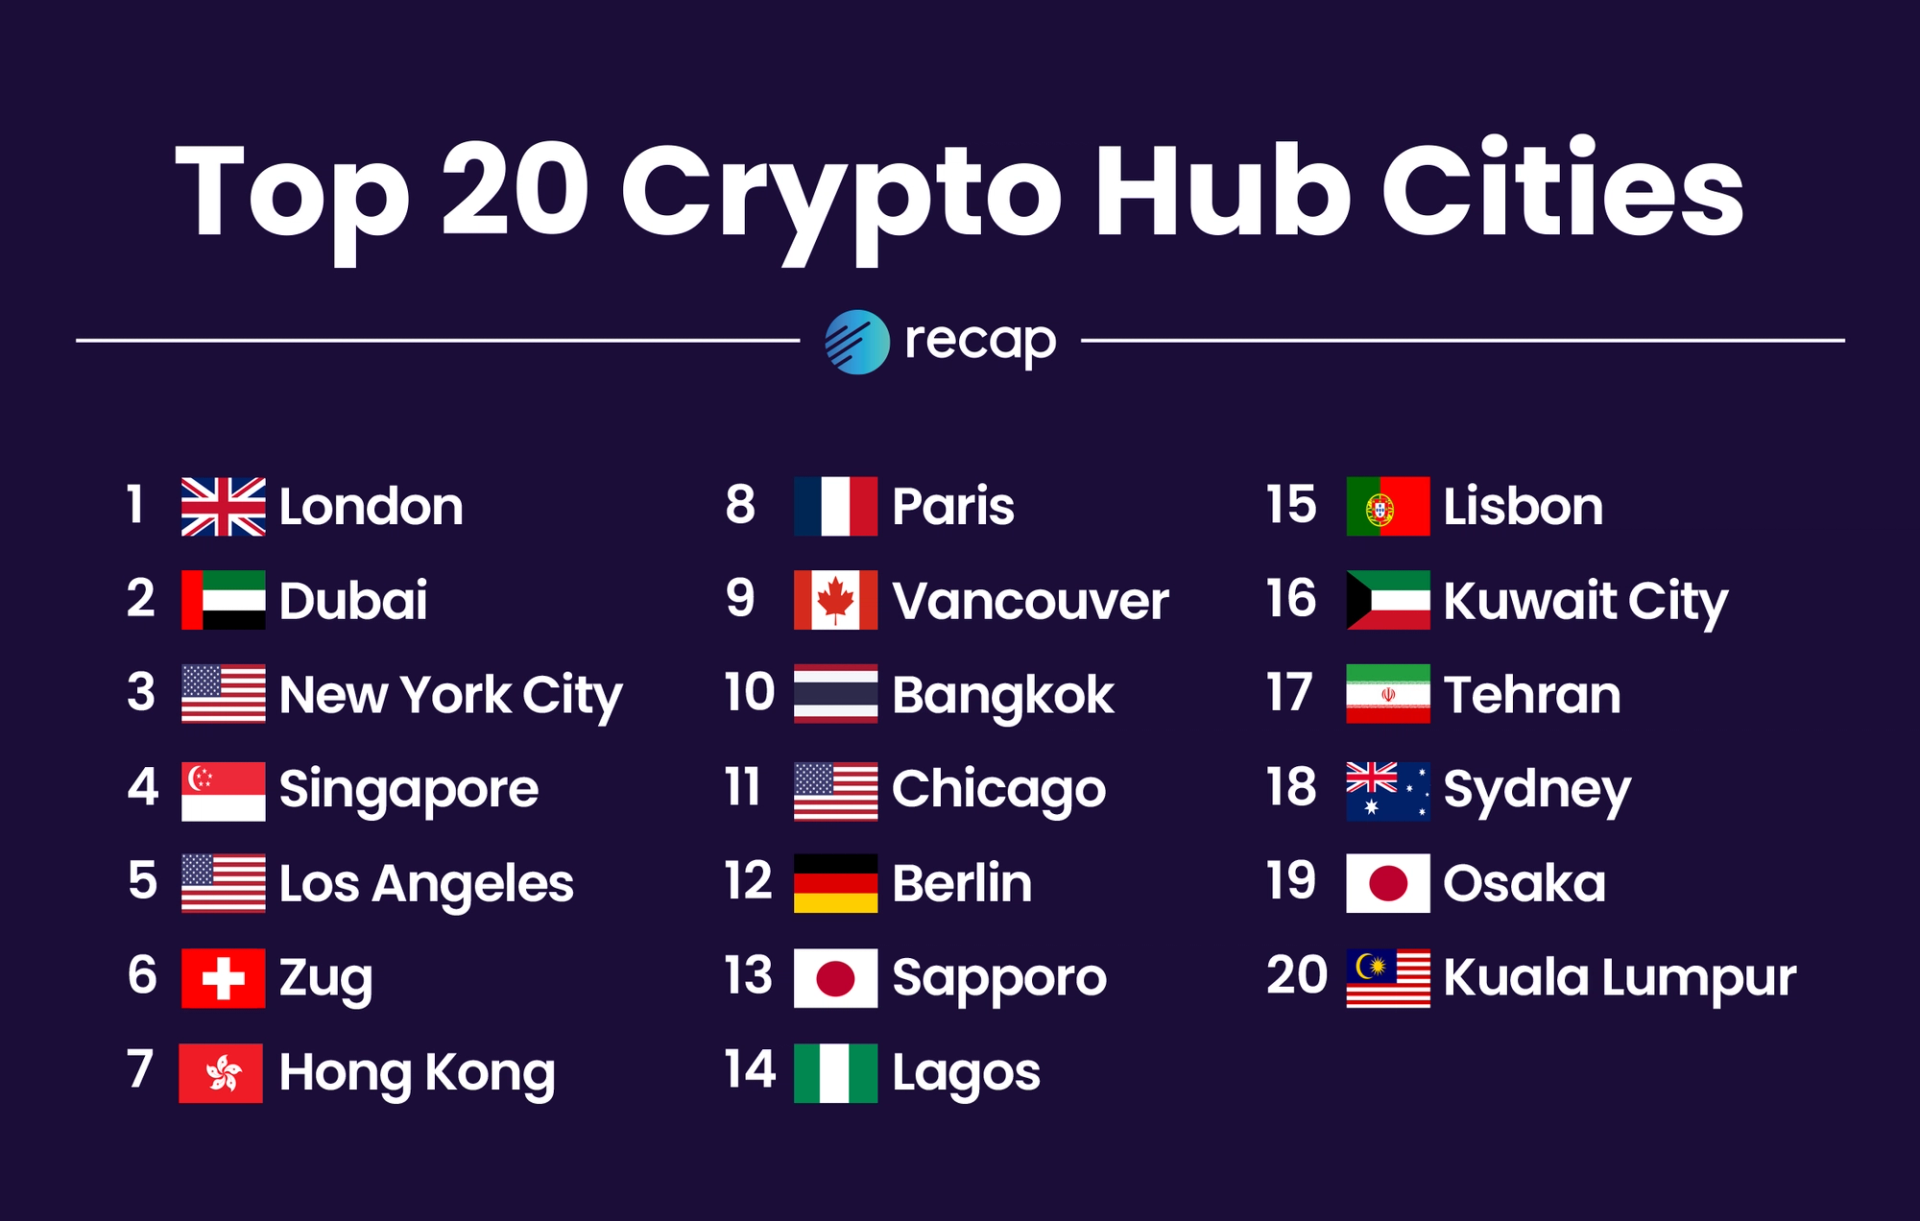 A list of the 20 top crypto hub cities next to their country's flag